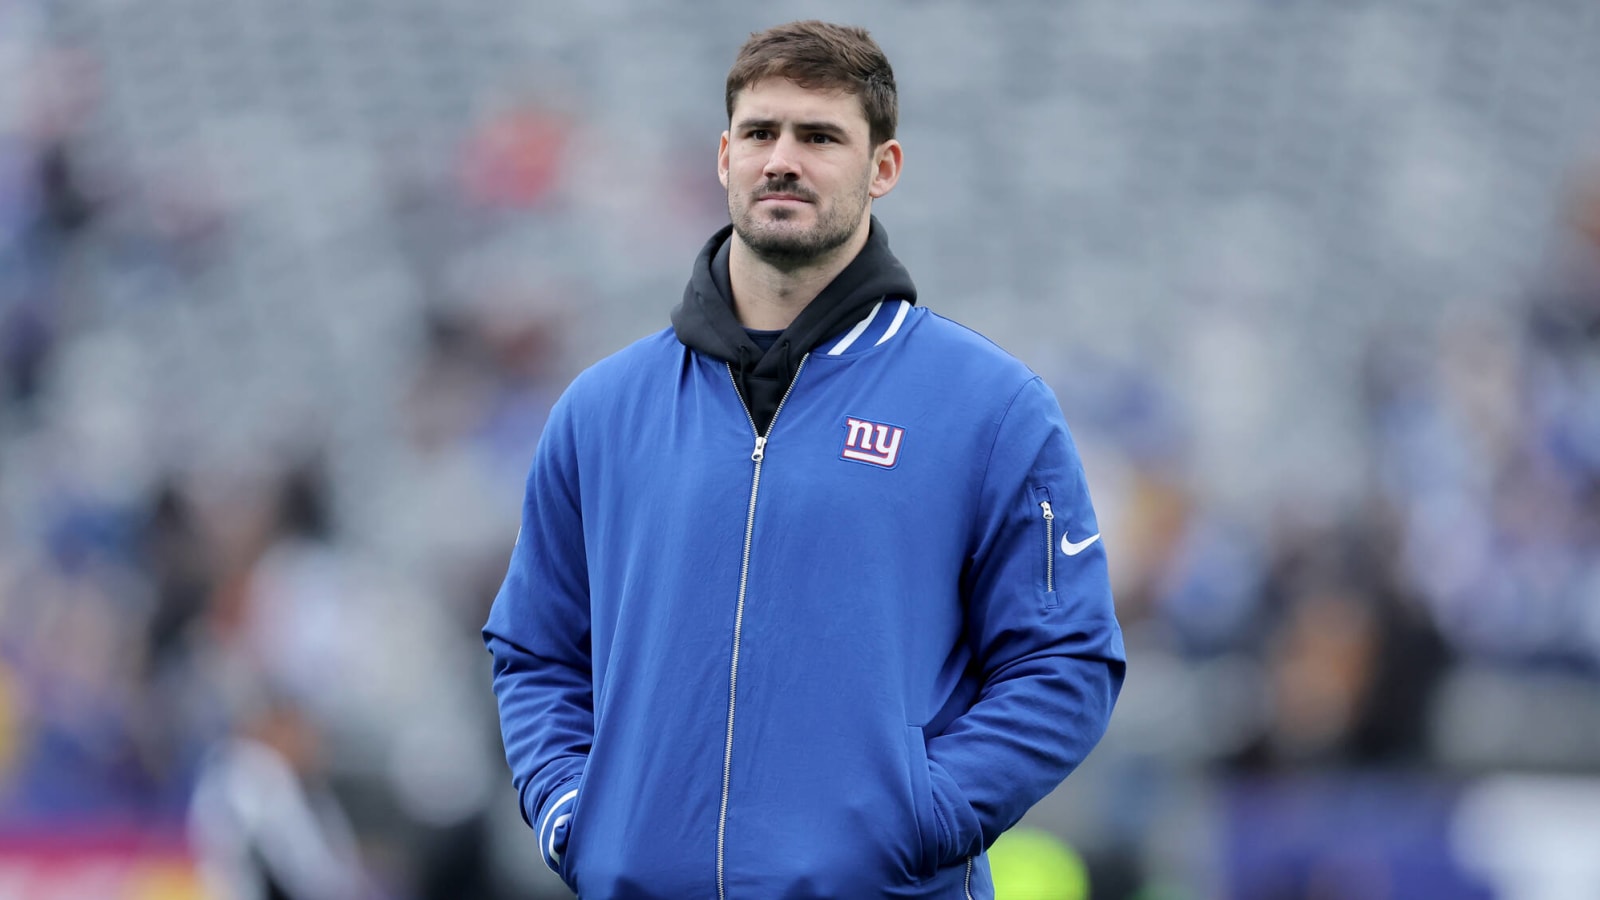 Giants will feature on the first-ever Hard Knocks ‘Offseason’